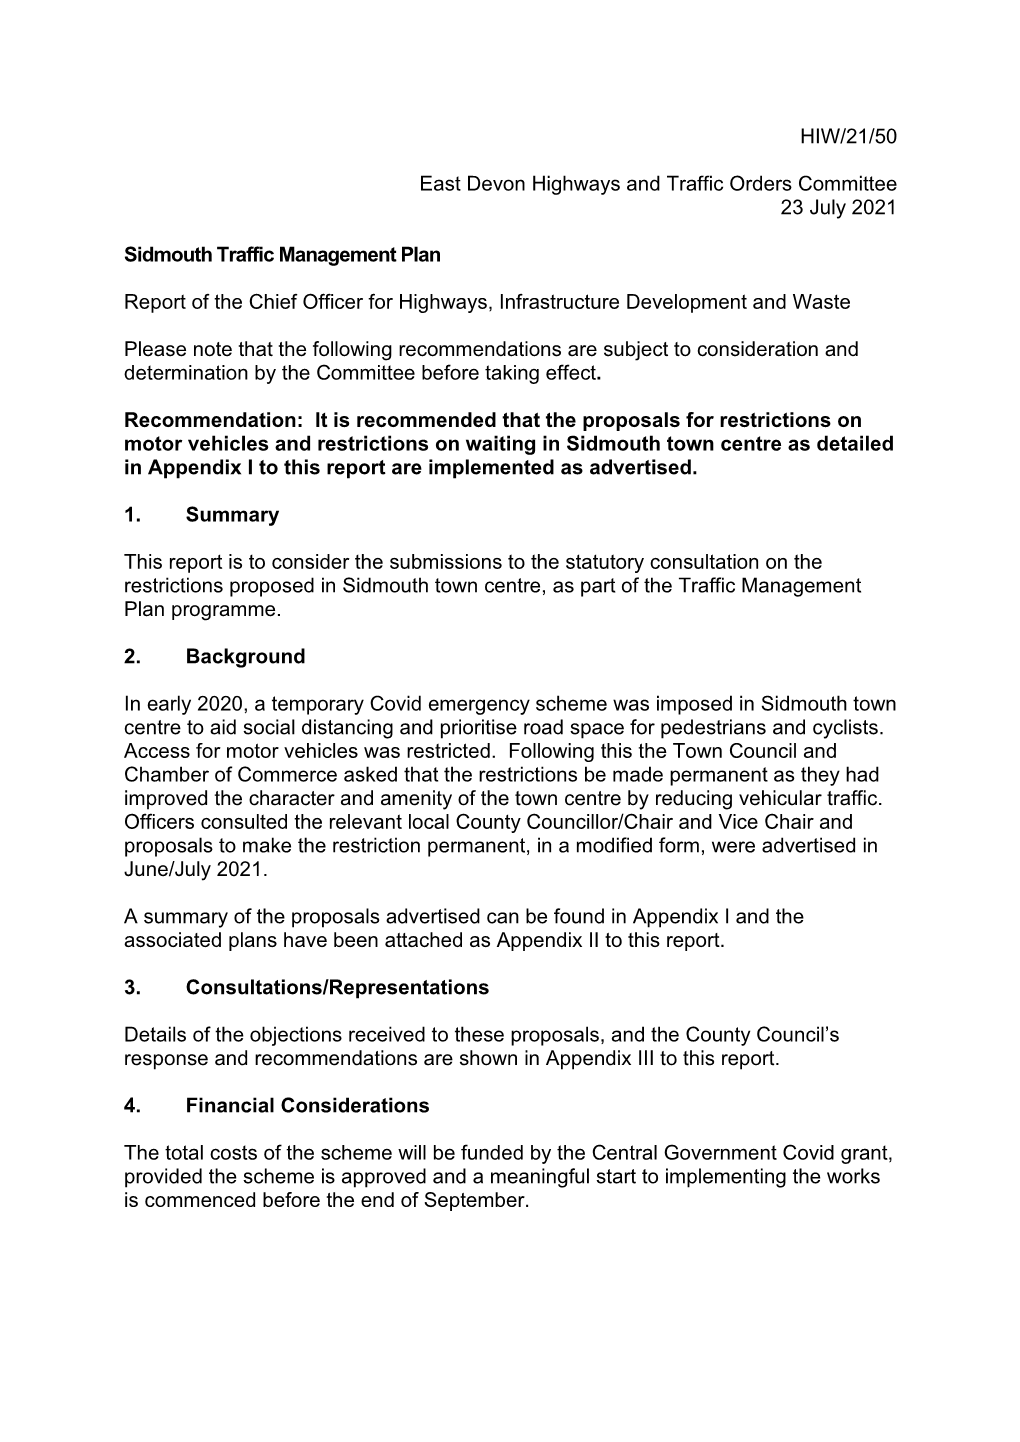 Sidmouth Traffic Management Plan